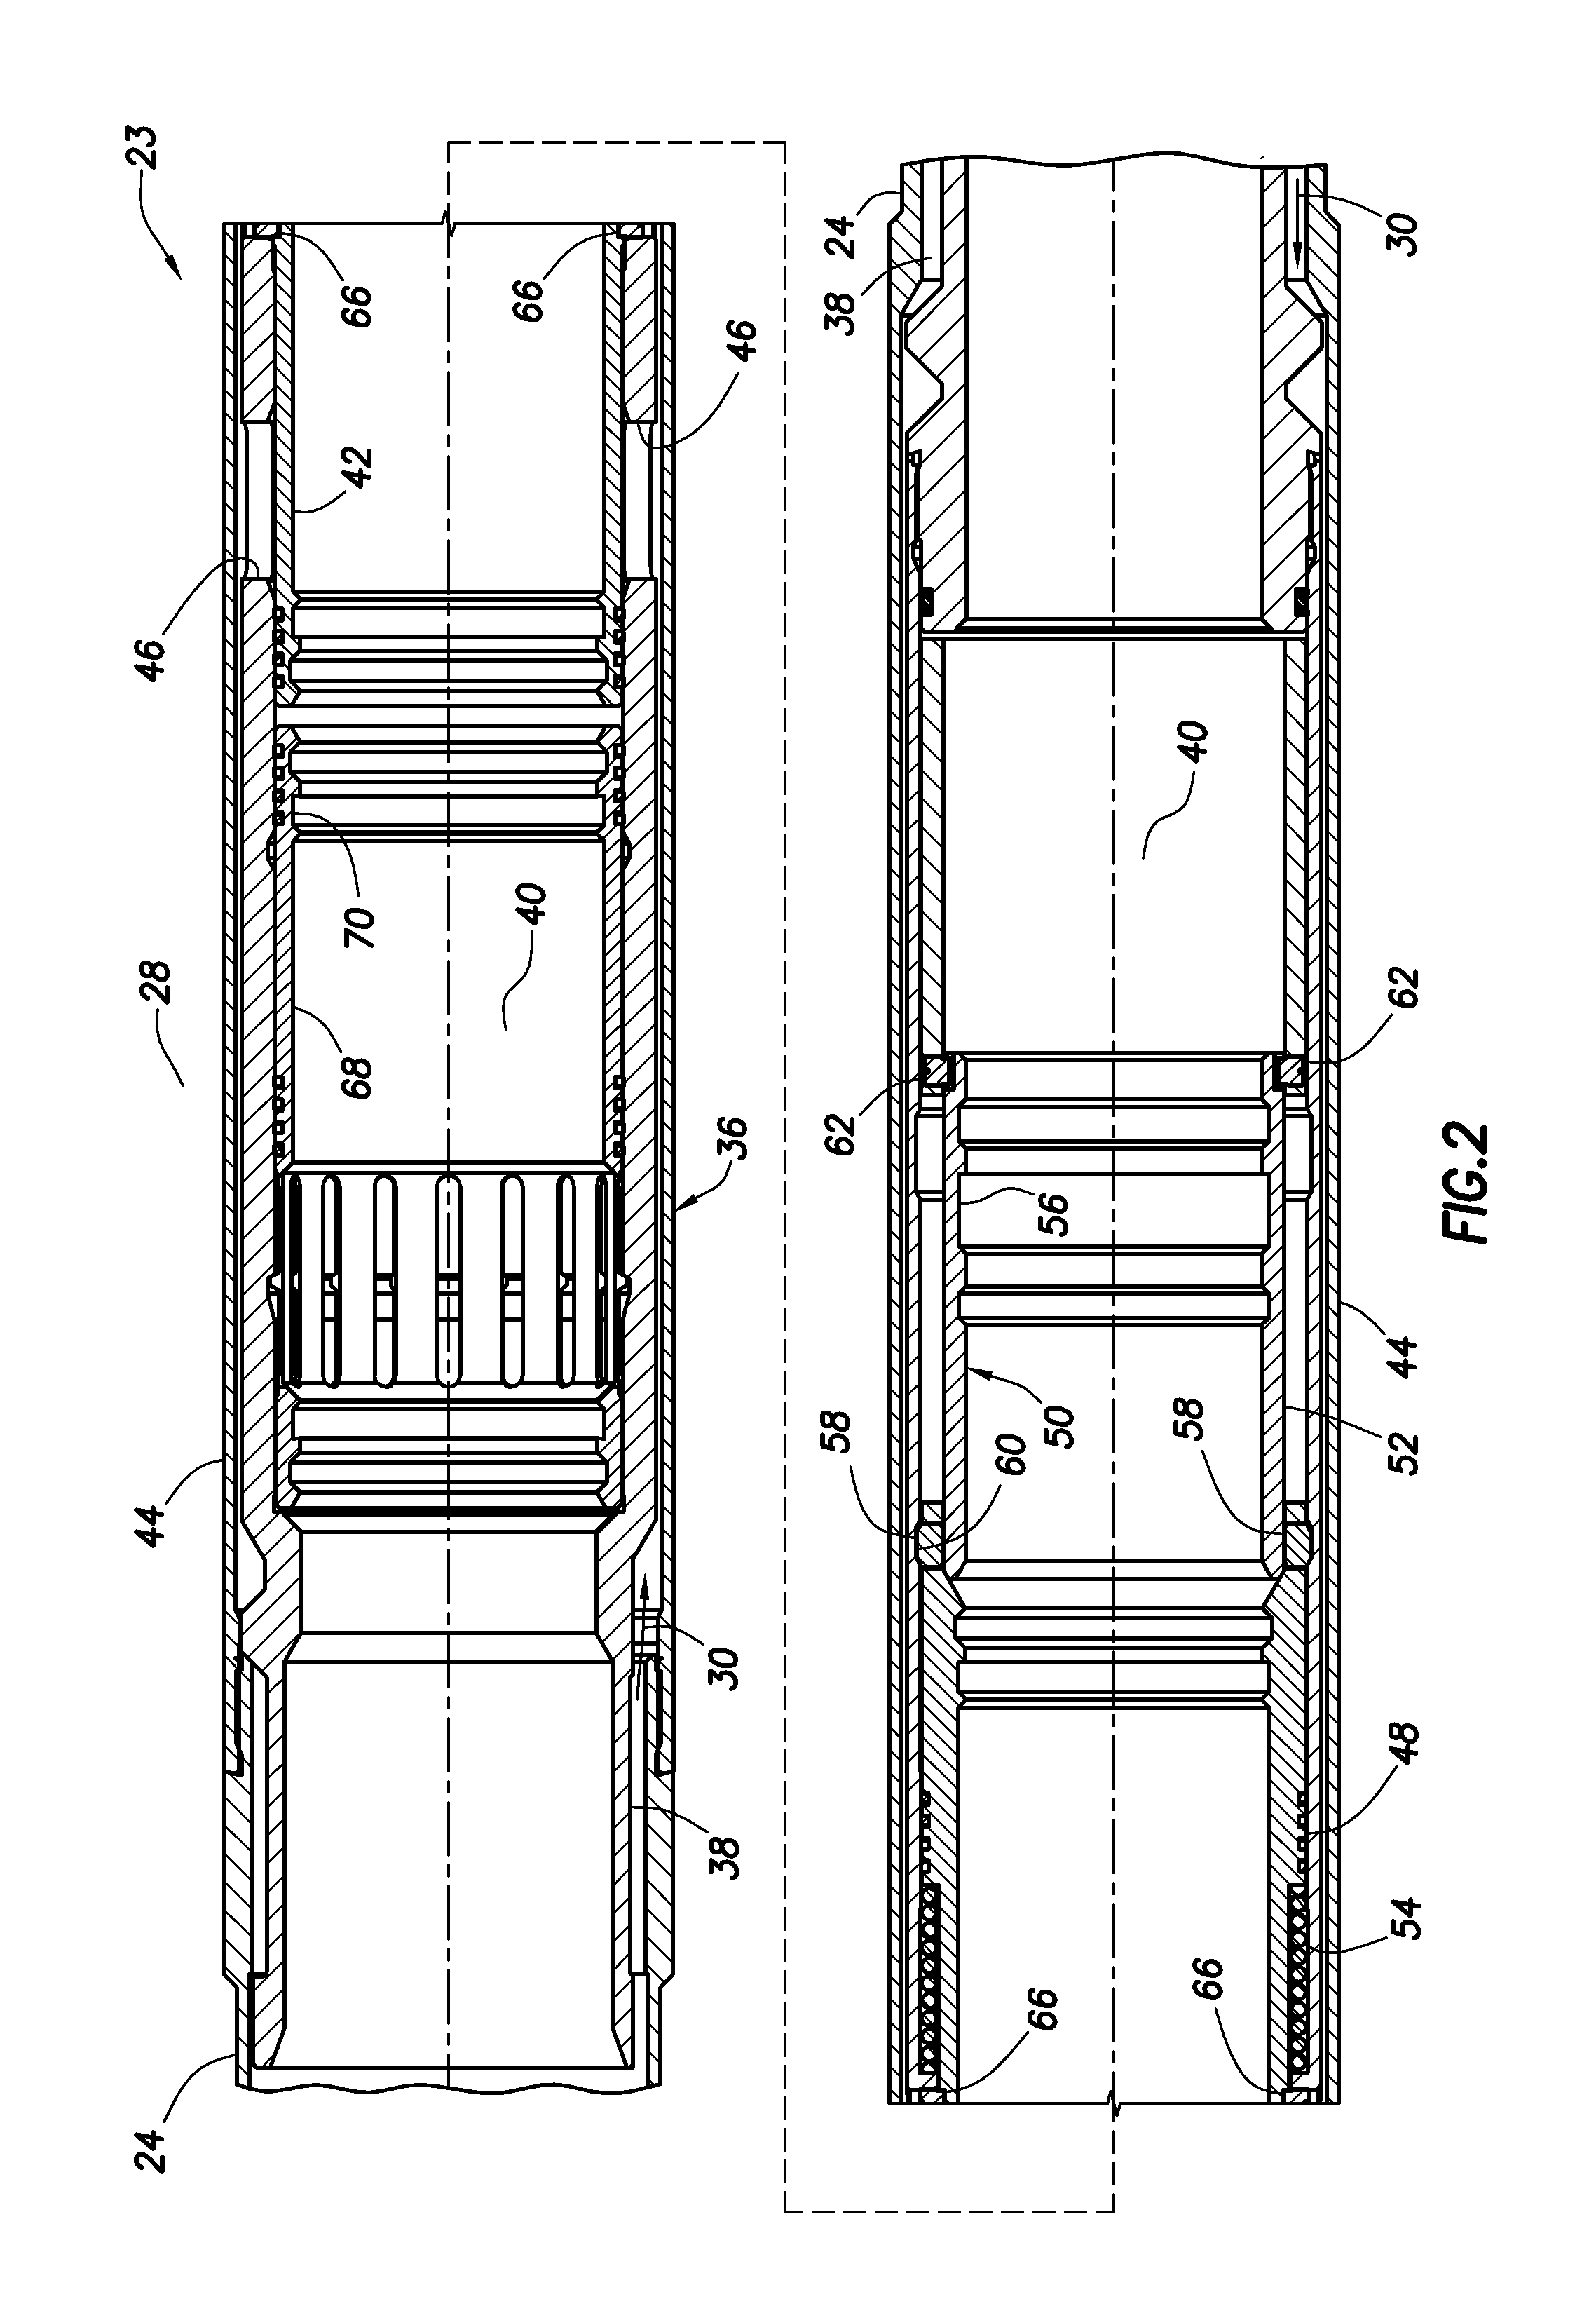 Remotely operated production valve and method